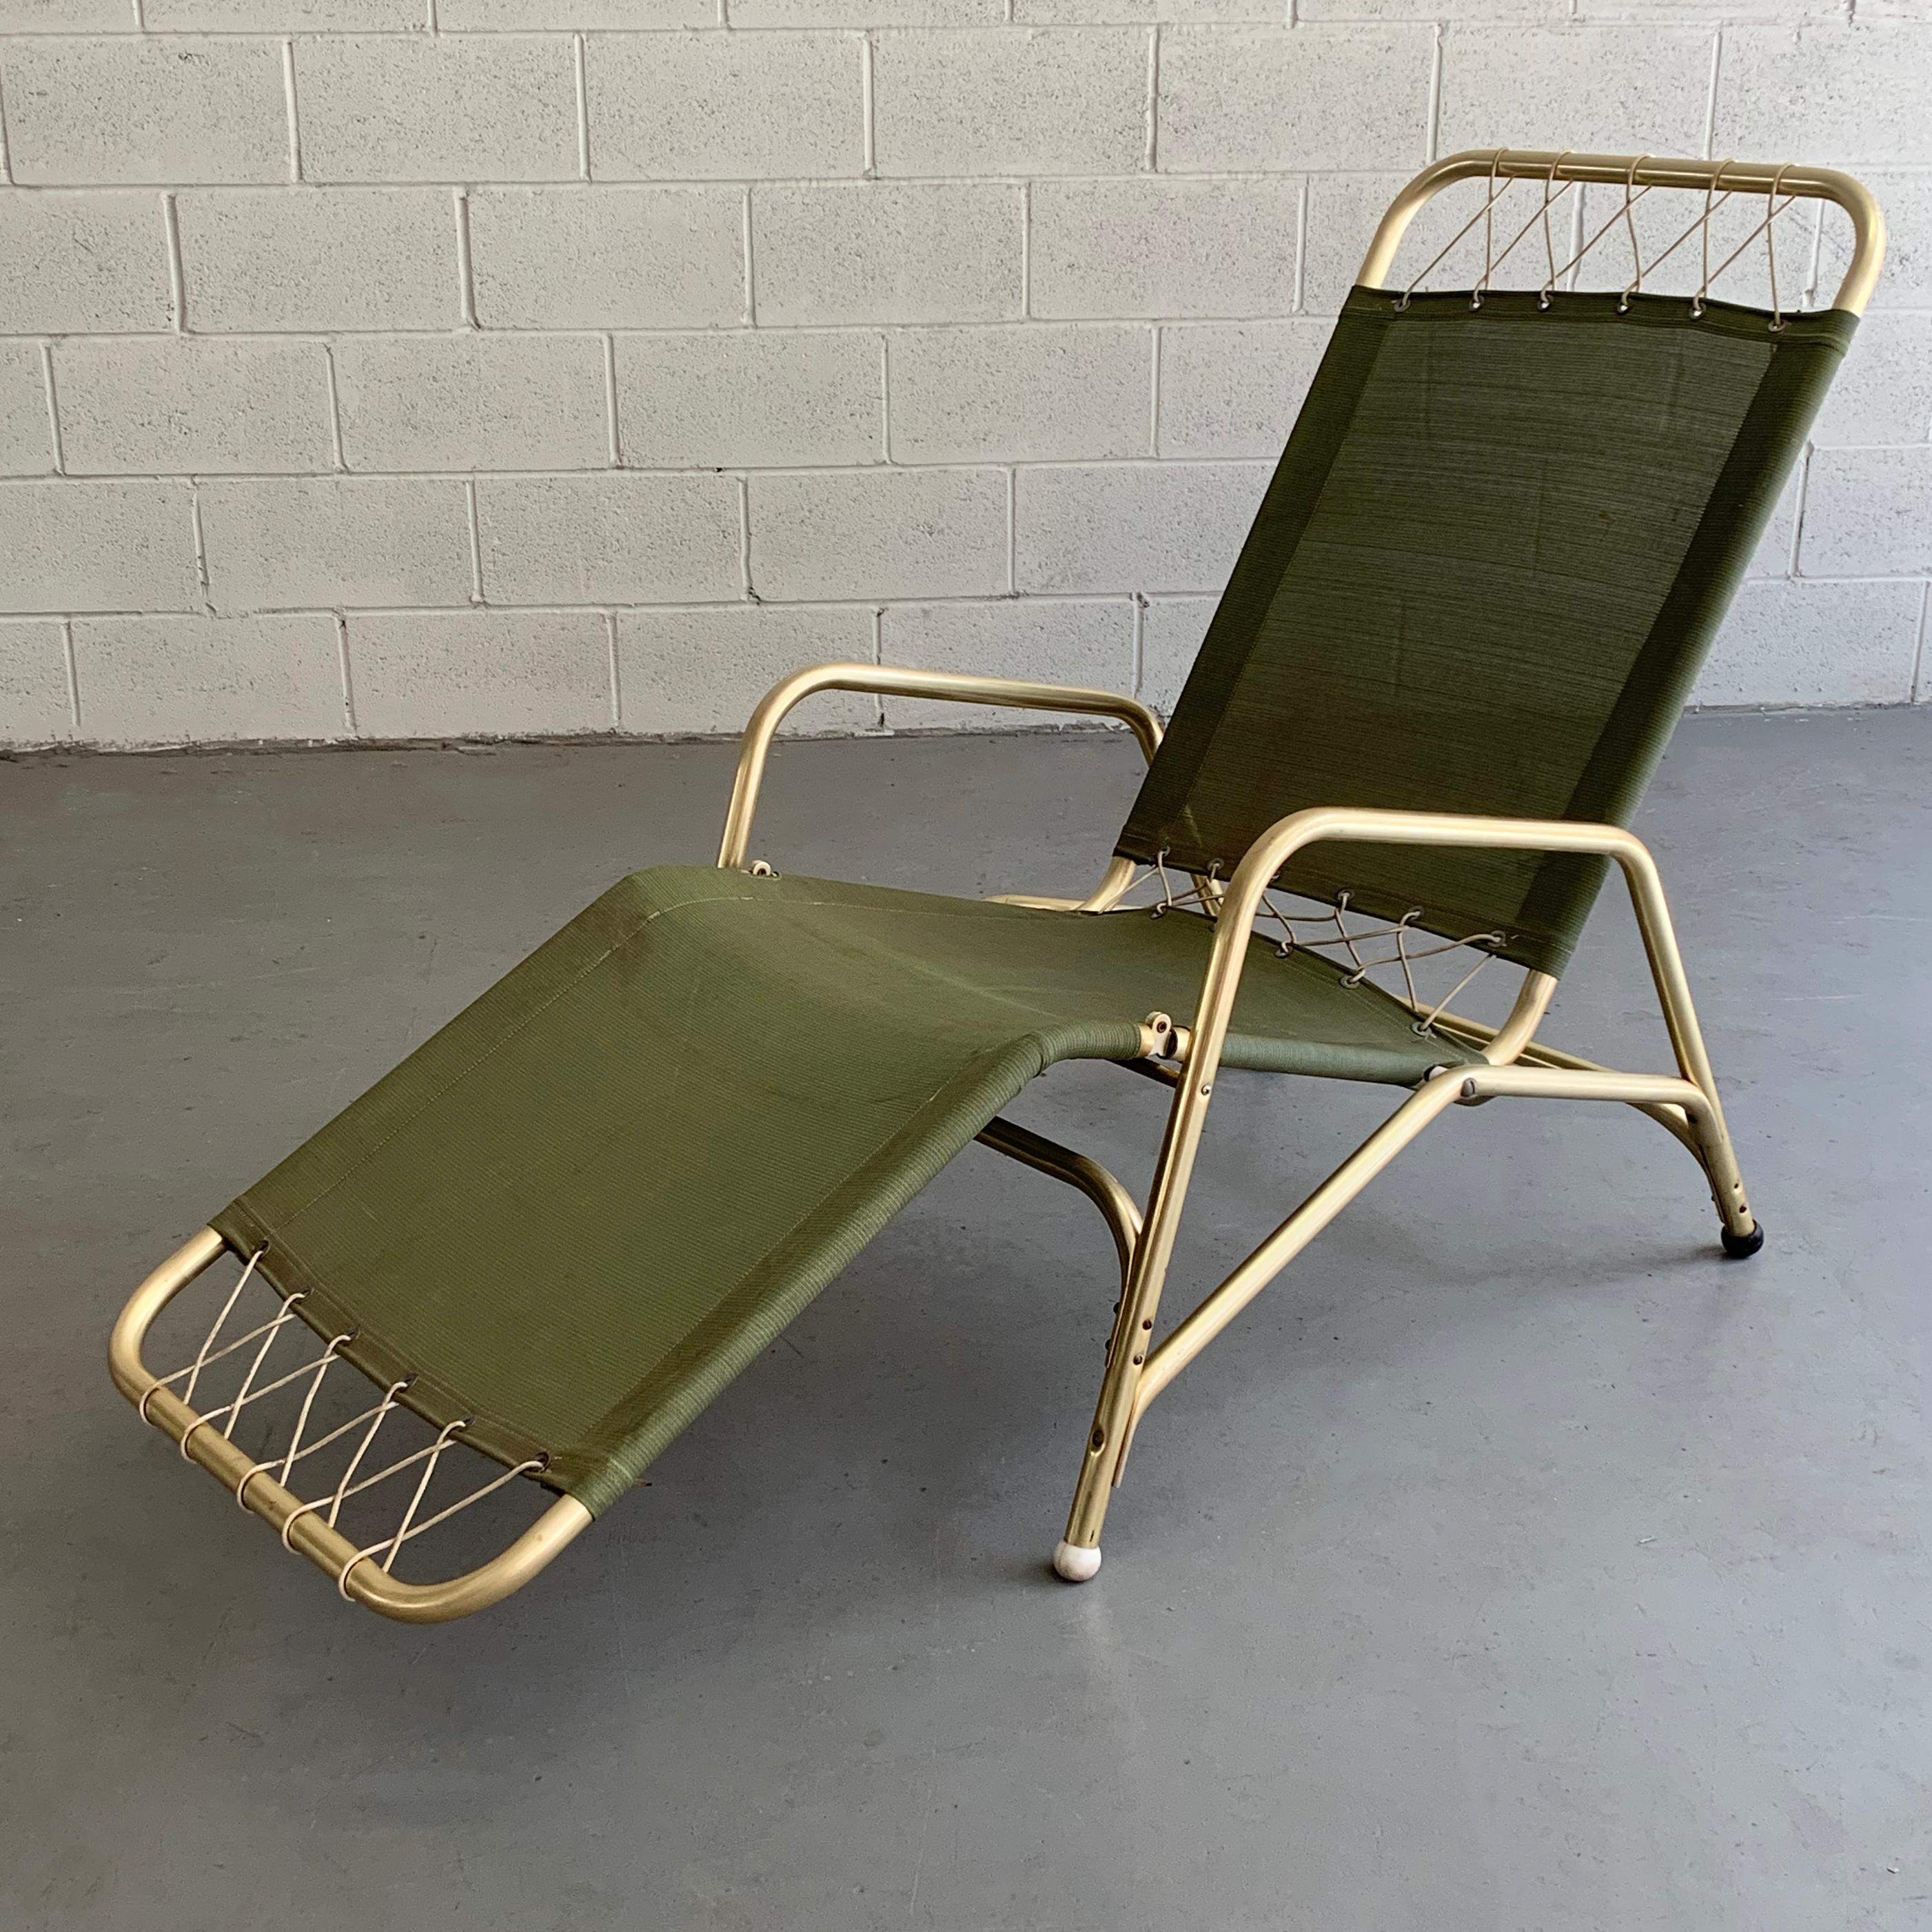 Art Deco, folding, aluminum frame, lounge chair by The Troy Sunshade Company features a green, woven nylon seat that elevates from 11 - 16 inches height when extended flat.